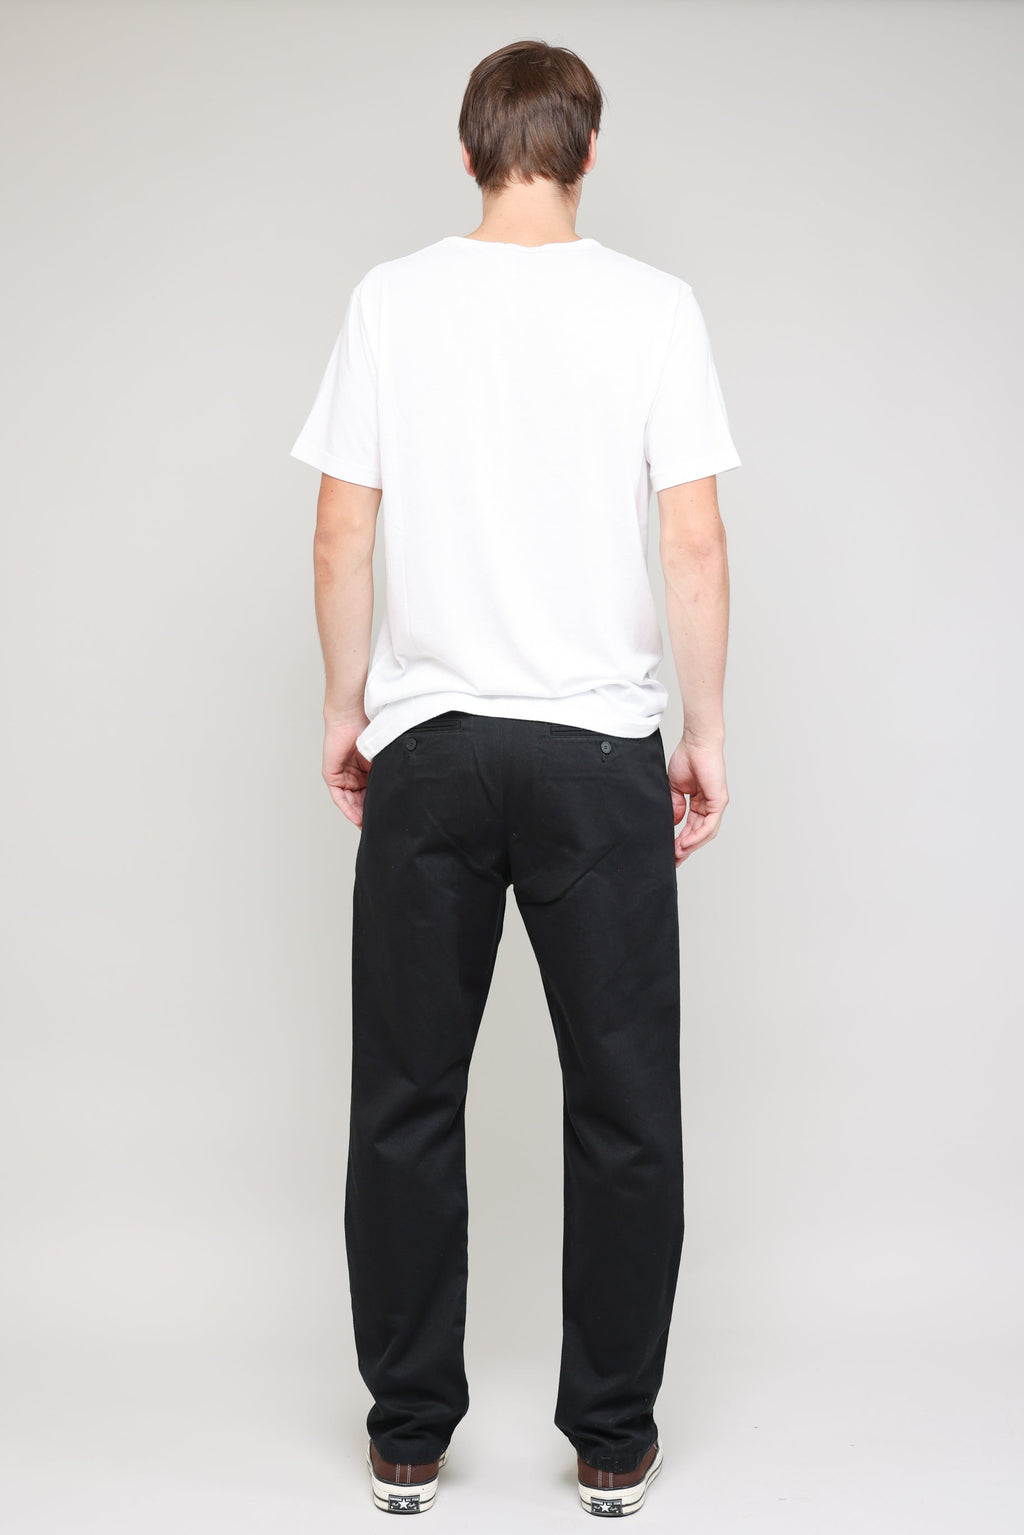 Pleated Chino Texture Cloth in Black 03